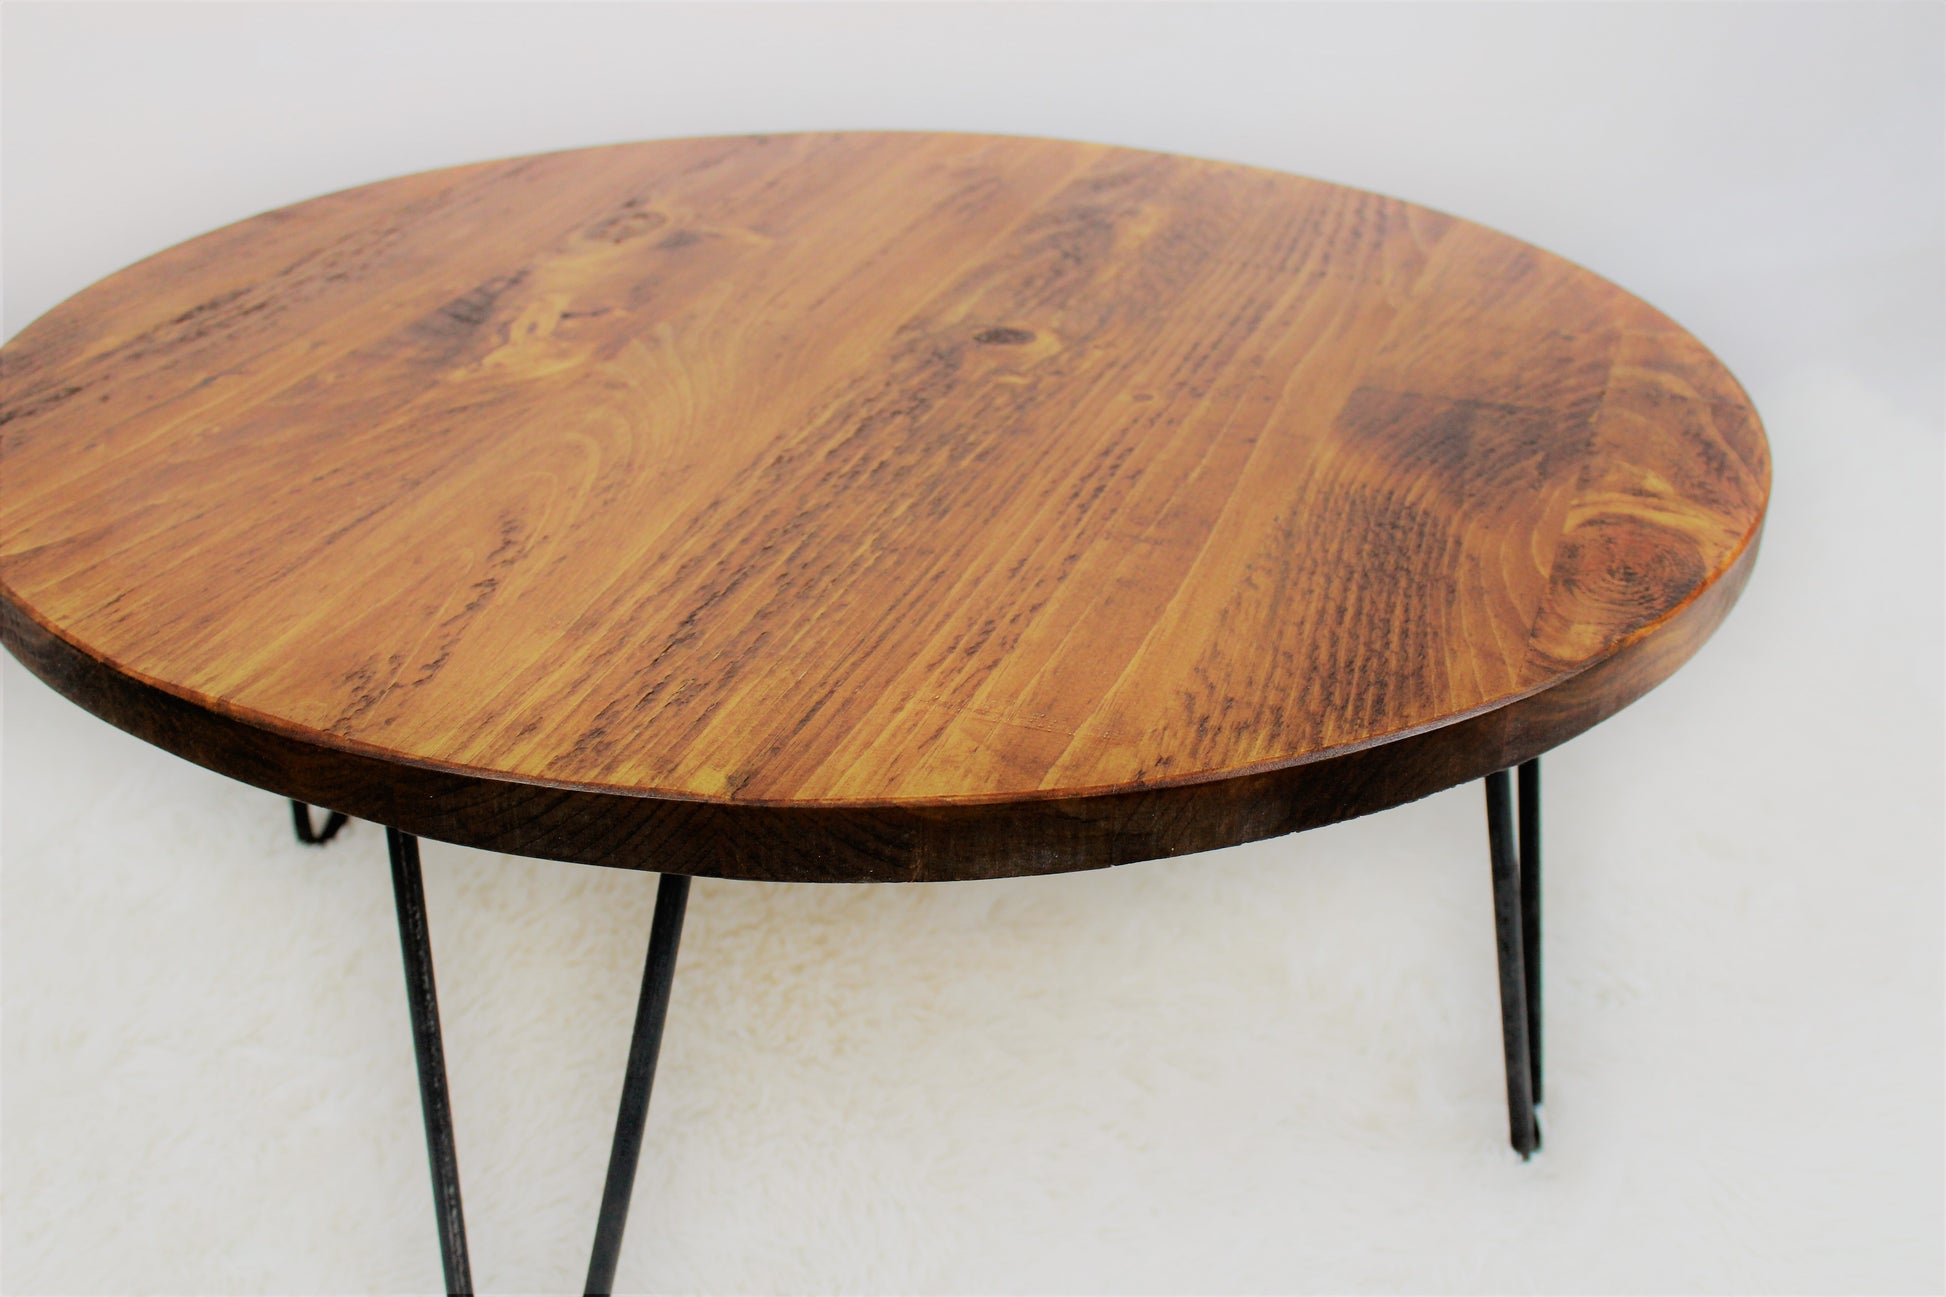 Low Round Wood Coffee Table, Rustic/ Industrial Round Table COLOUR FURNITURE 